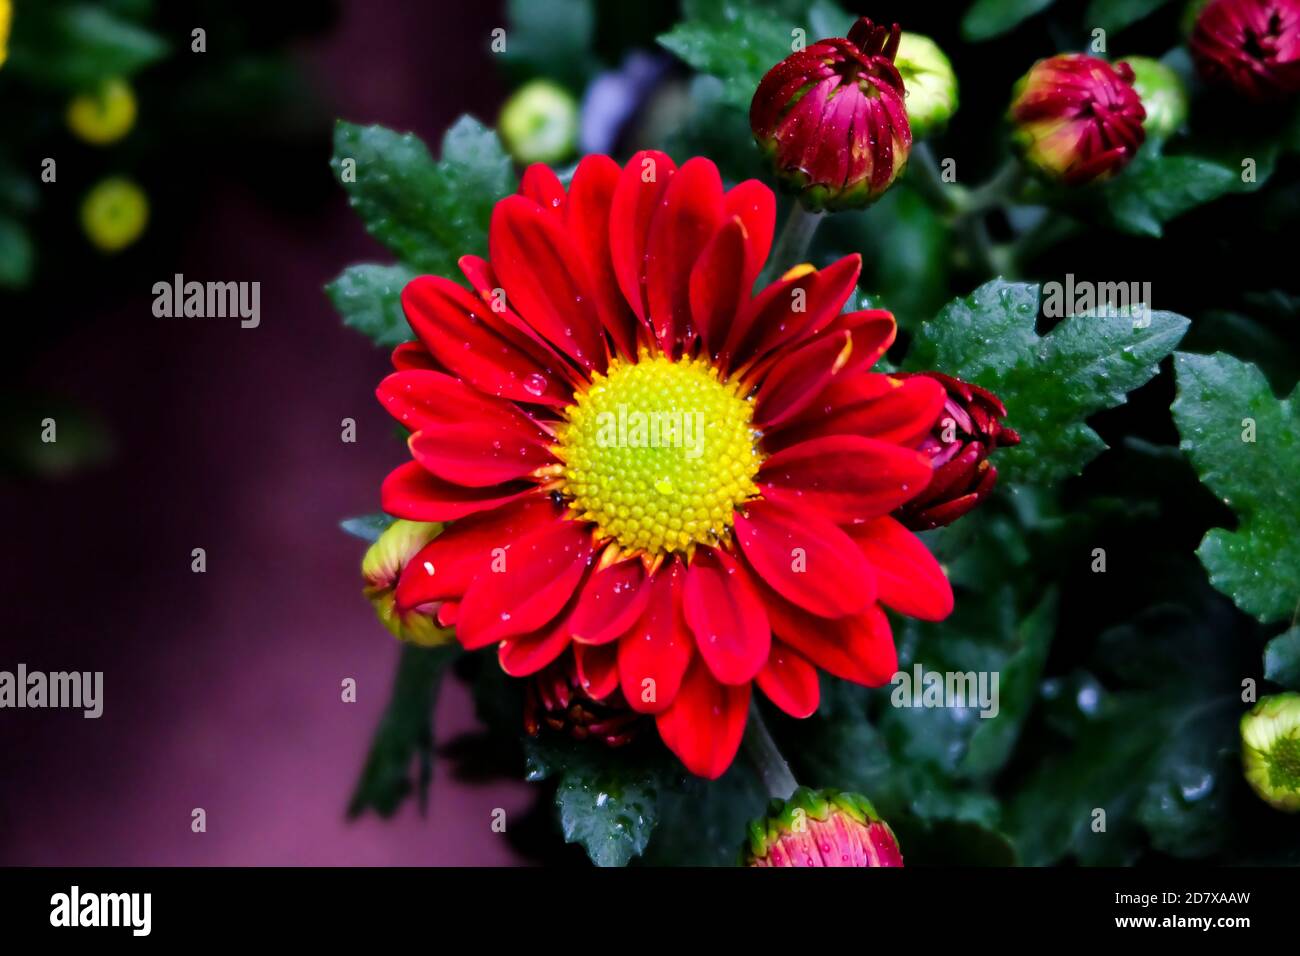 Close up photo, Beautiful Red Aster flower  in natural garden with soft focus and blurred background, Selectived focus Stock Photo